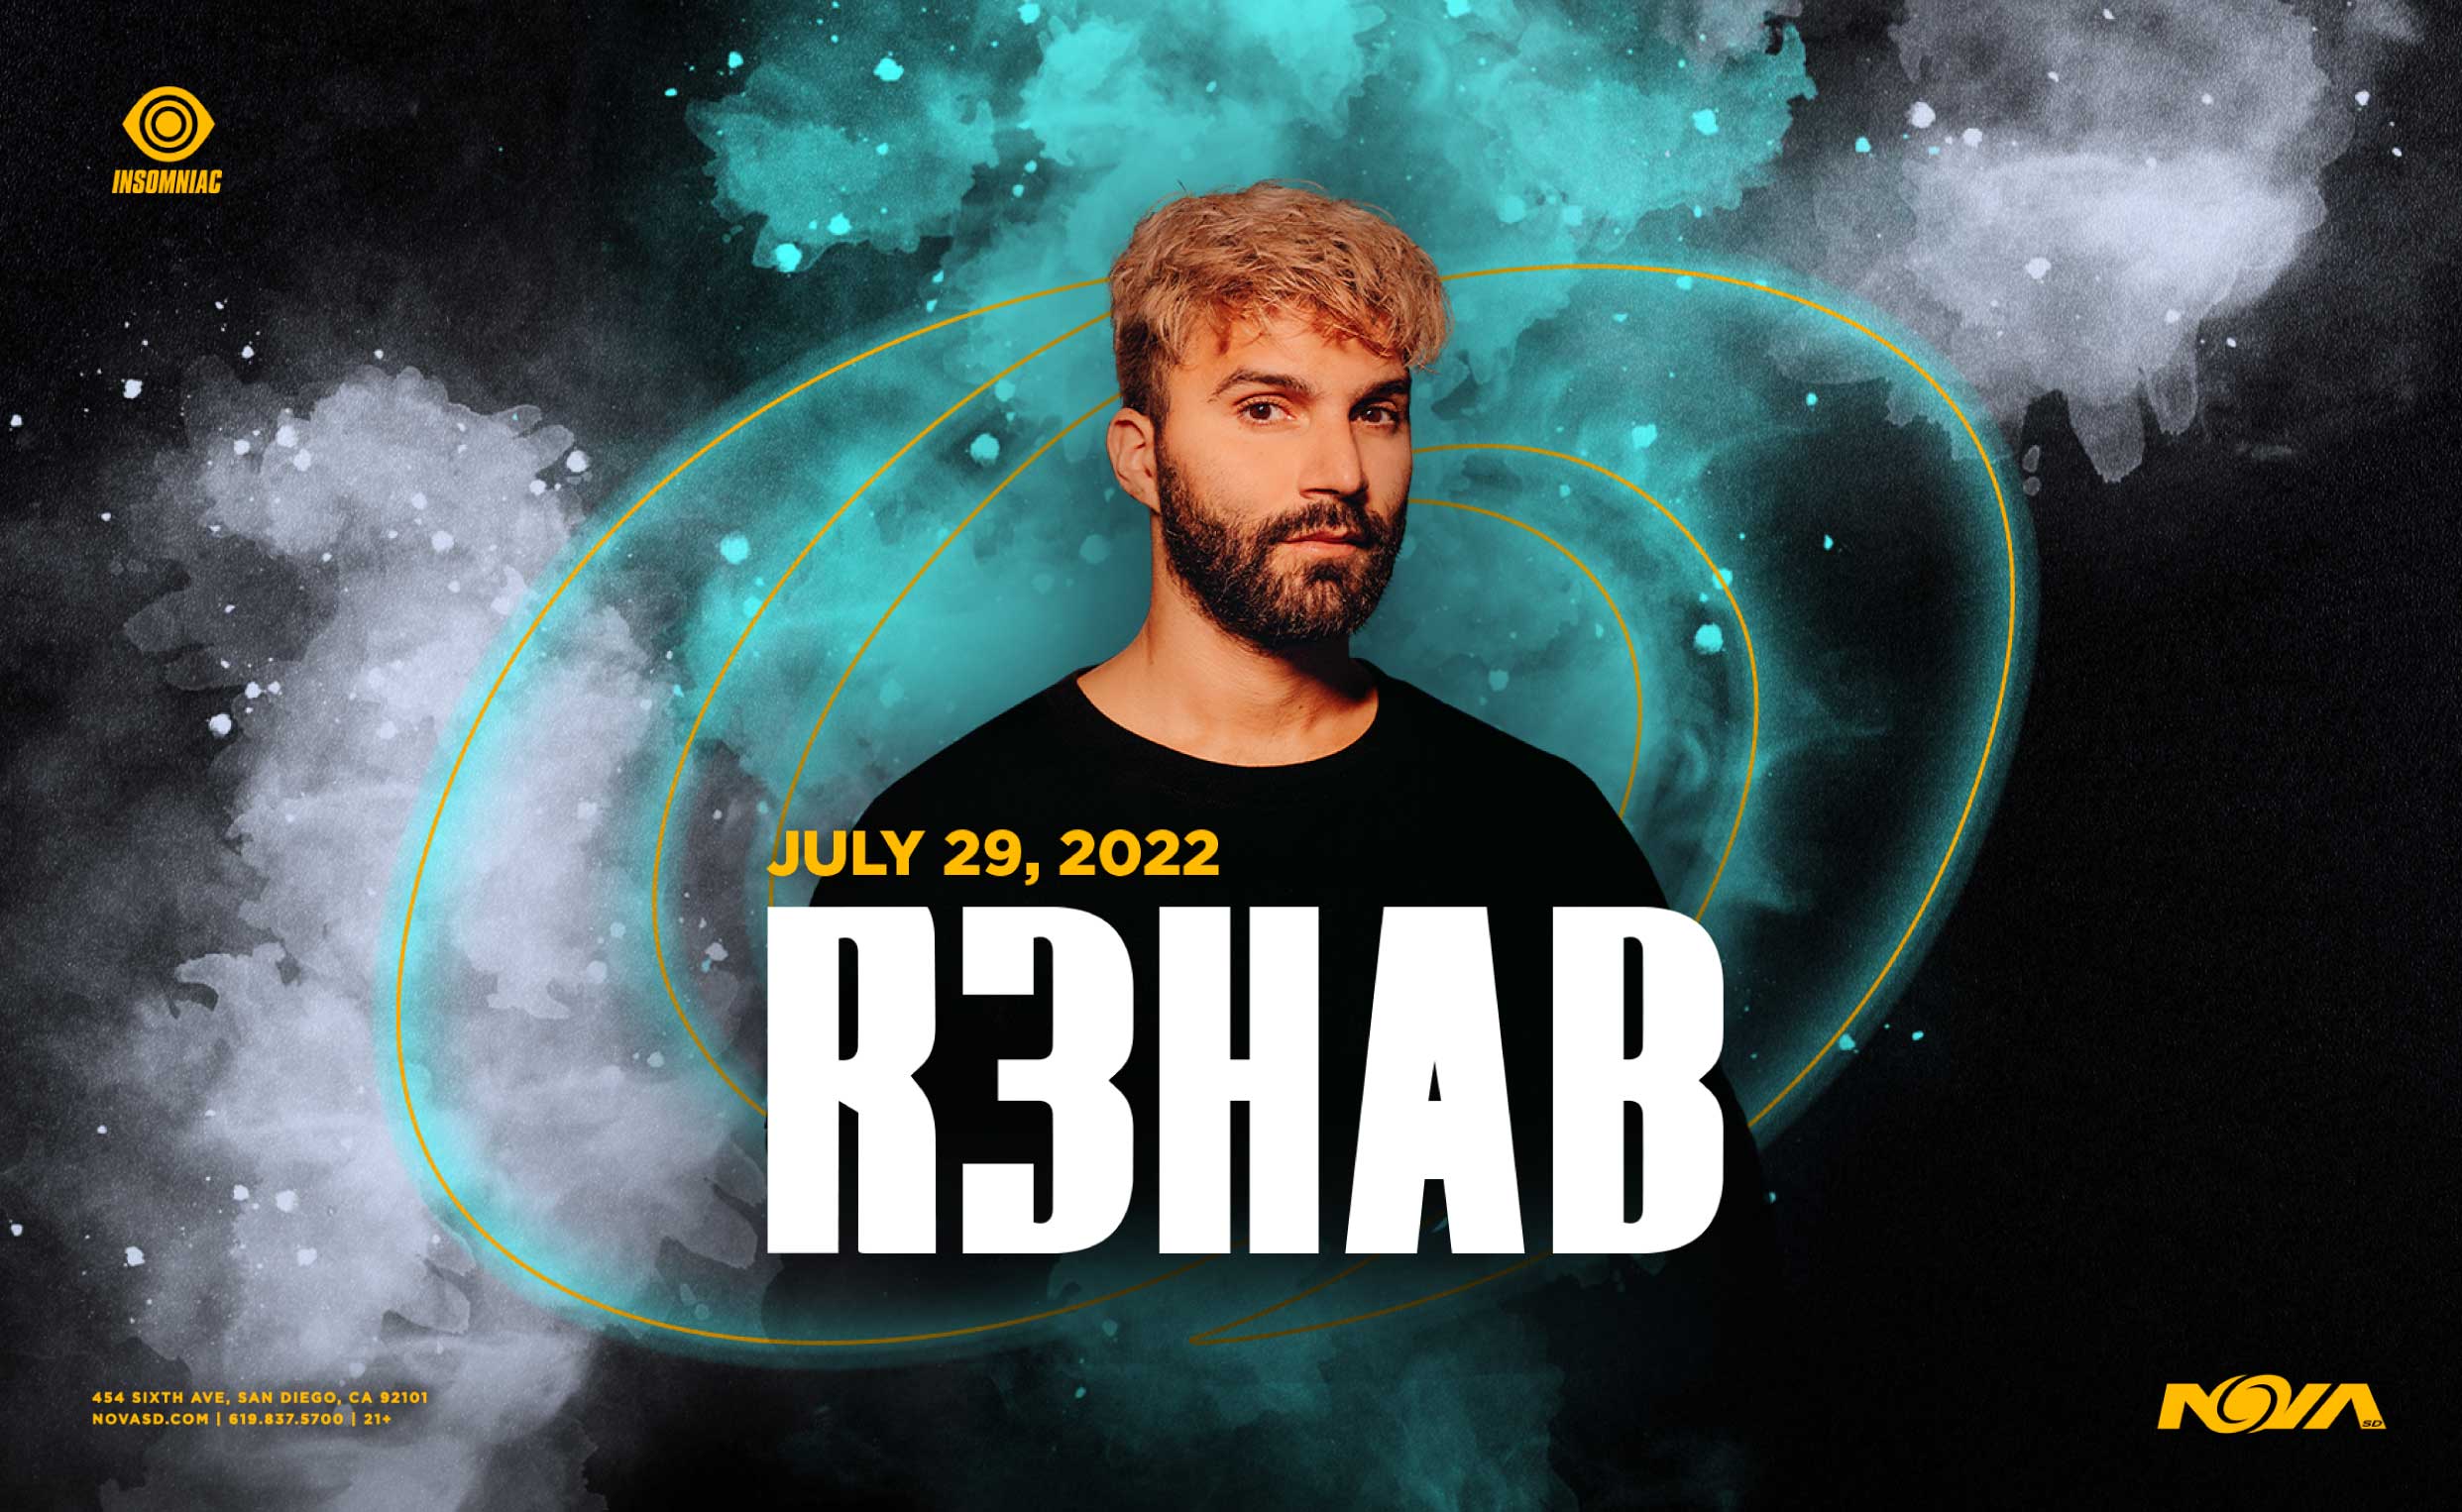 R3hab logo music brands gray stone background R3hab emblem music logos  R3hab music signs R3hab metal logo stone te  Stone texture Music  logo Music signs